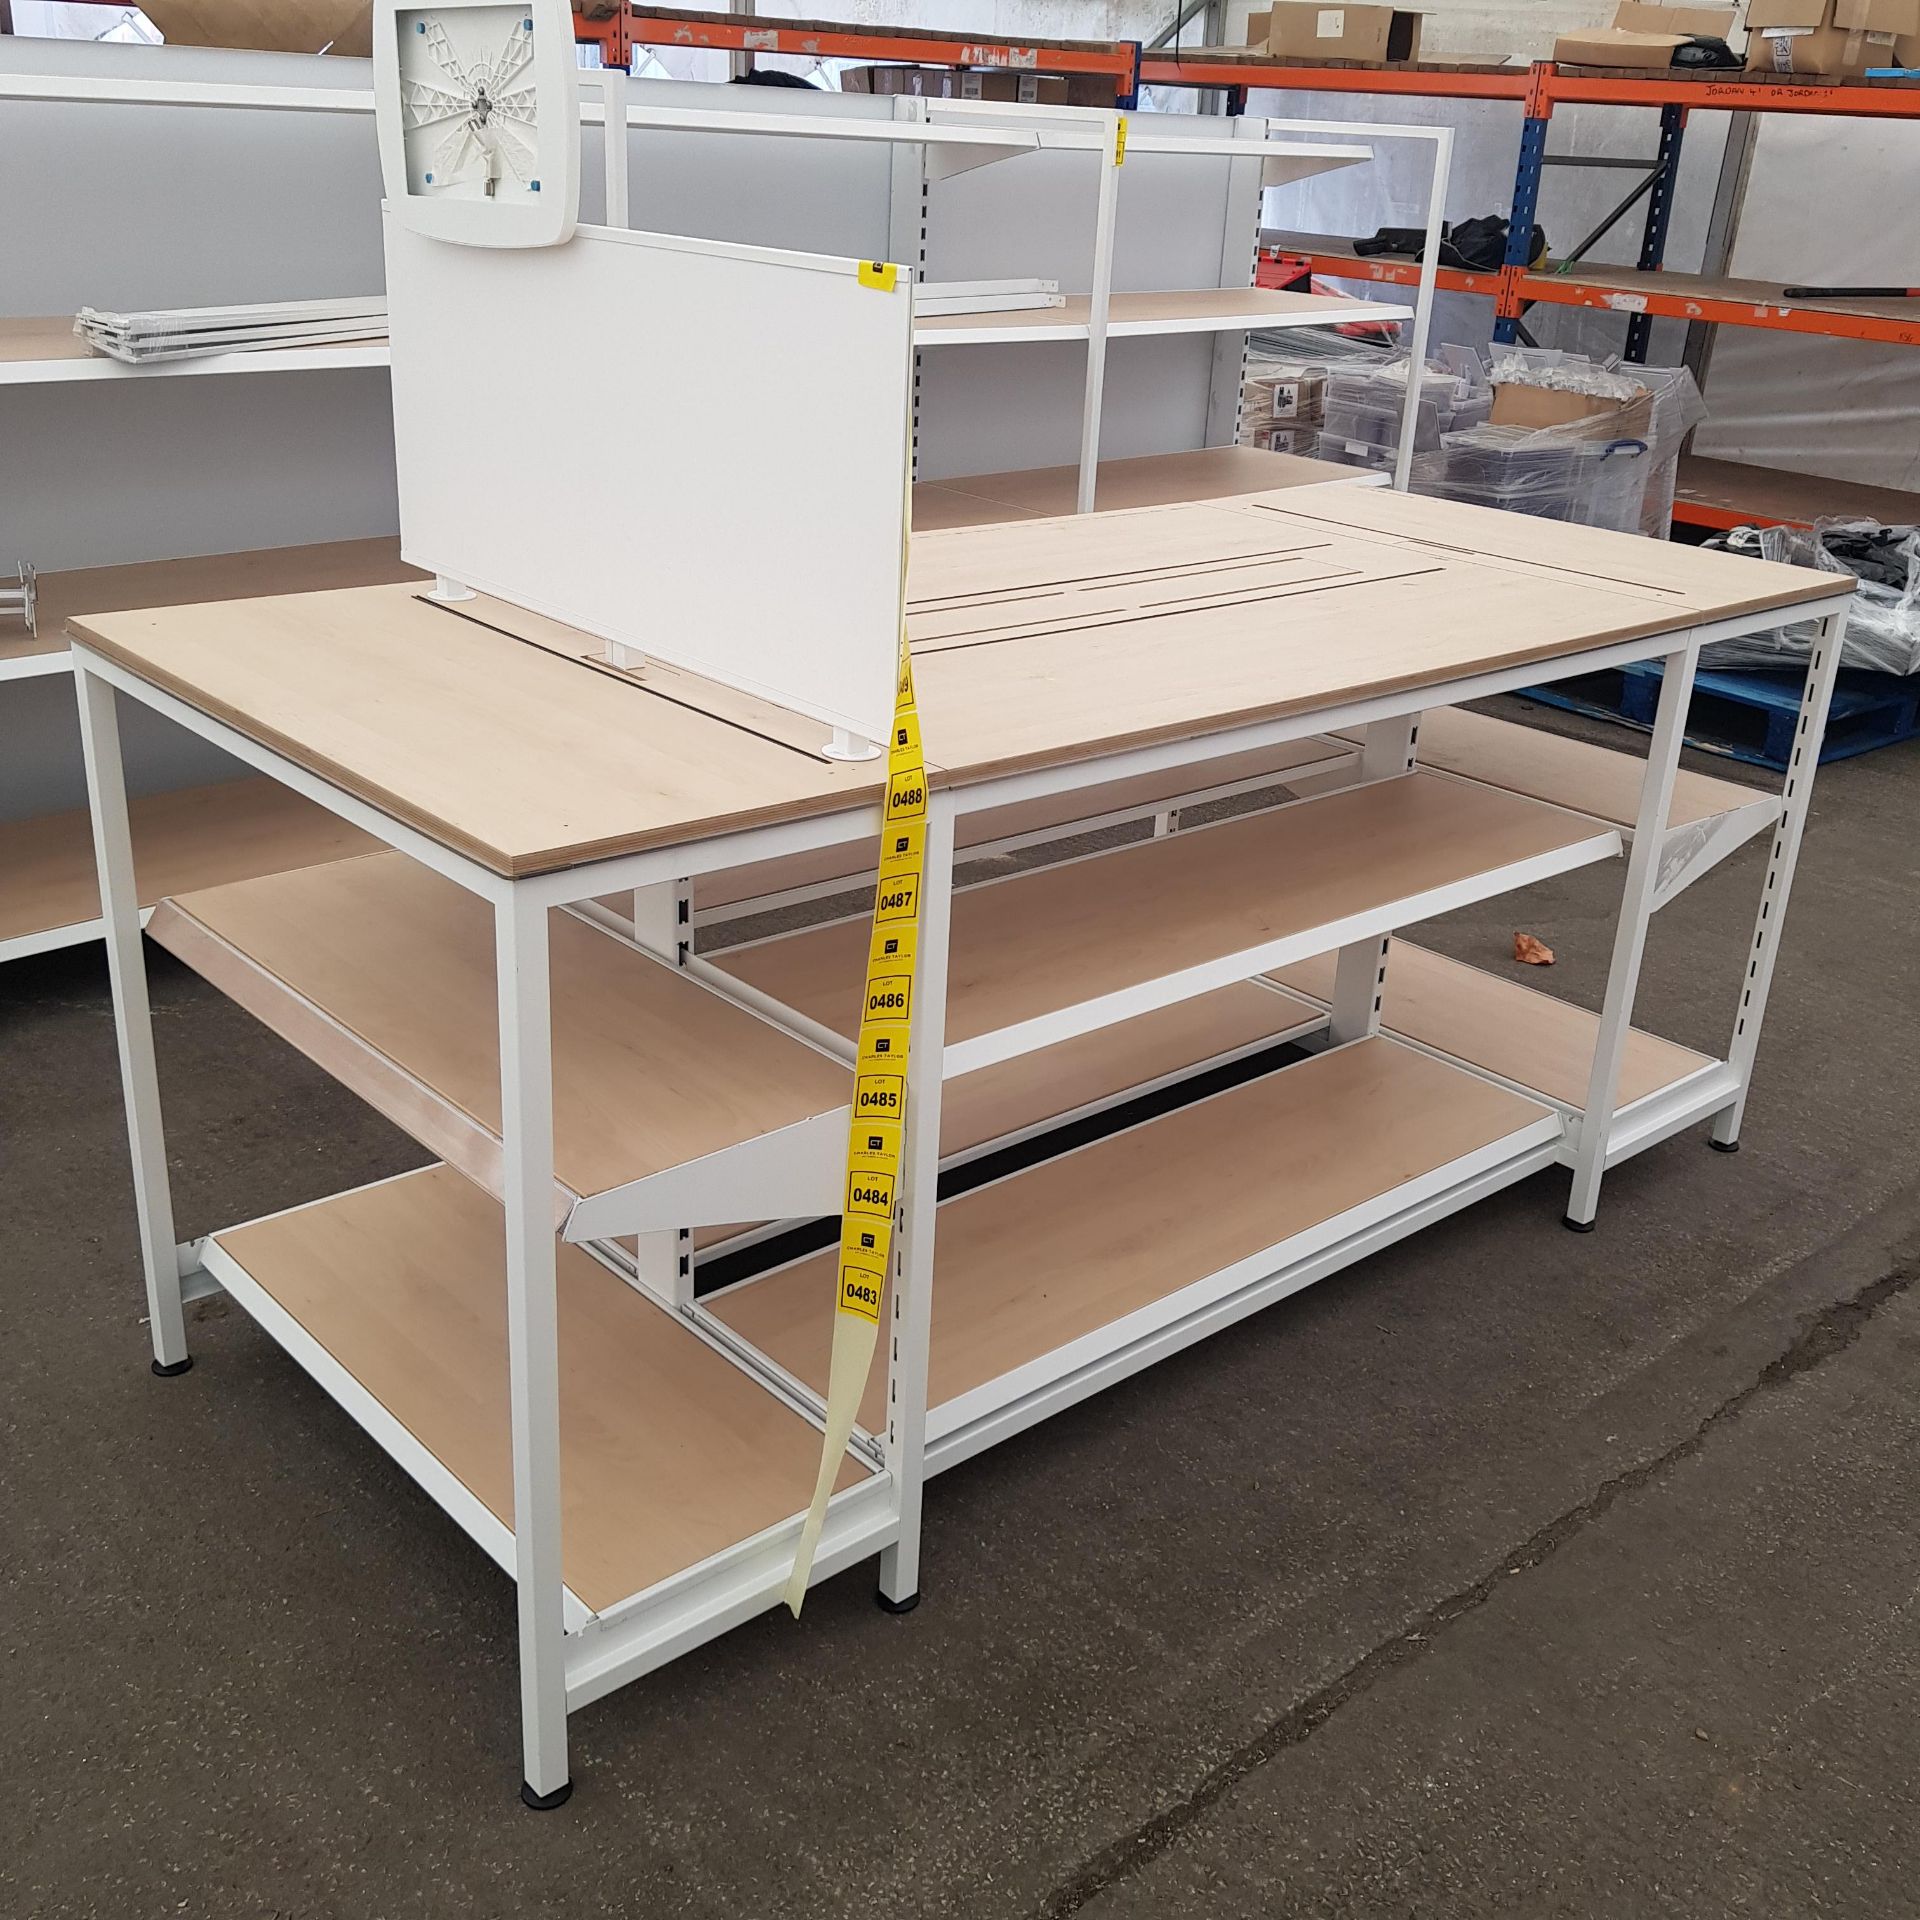 1 X BAY TABLE WITH 2 TIER UNDER SHELVING WOOD BOARDS (0.95m H x 2.22m L x 0.95m W)